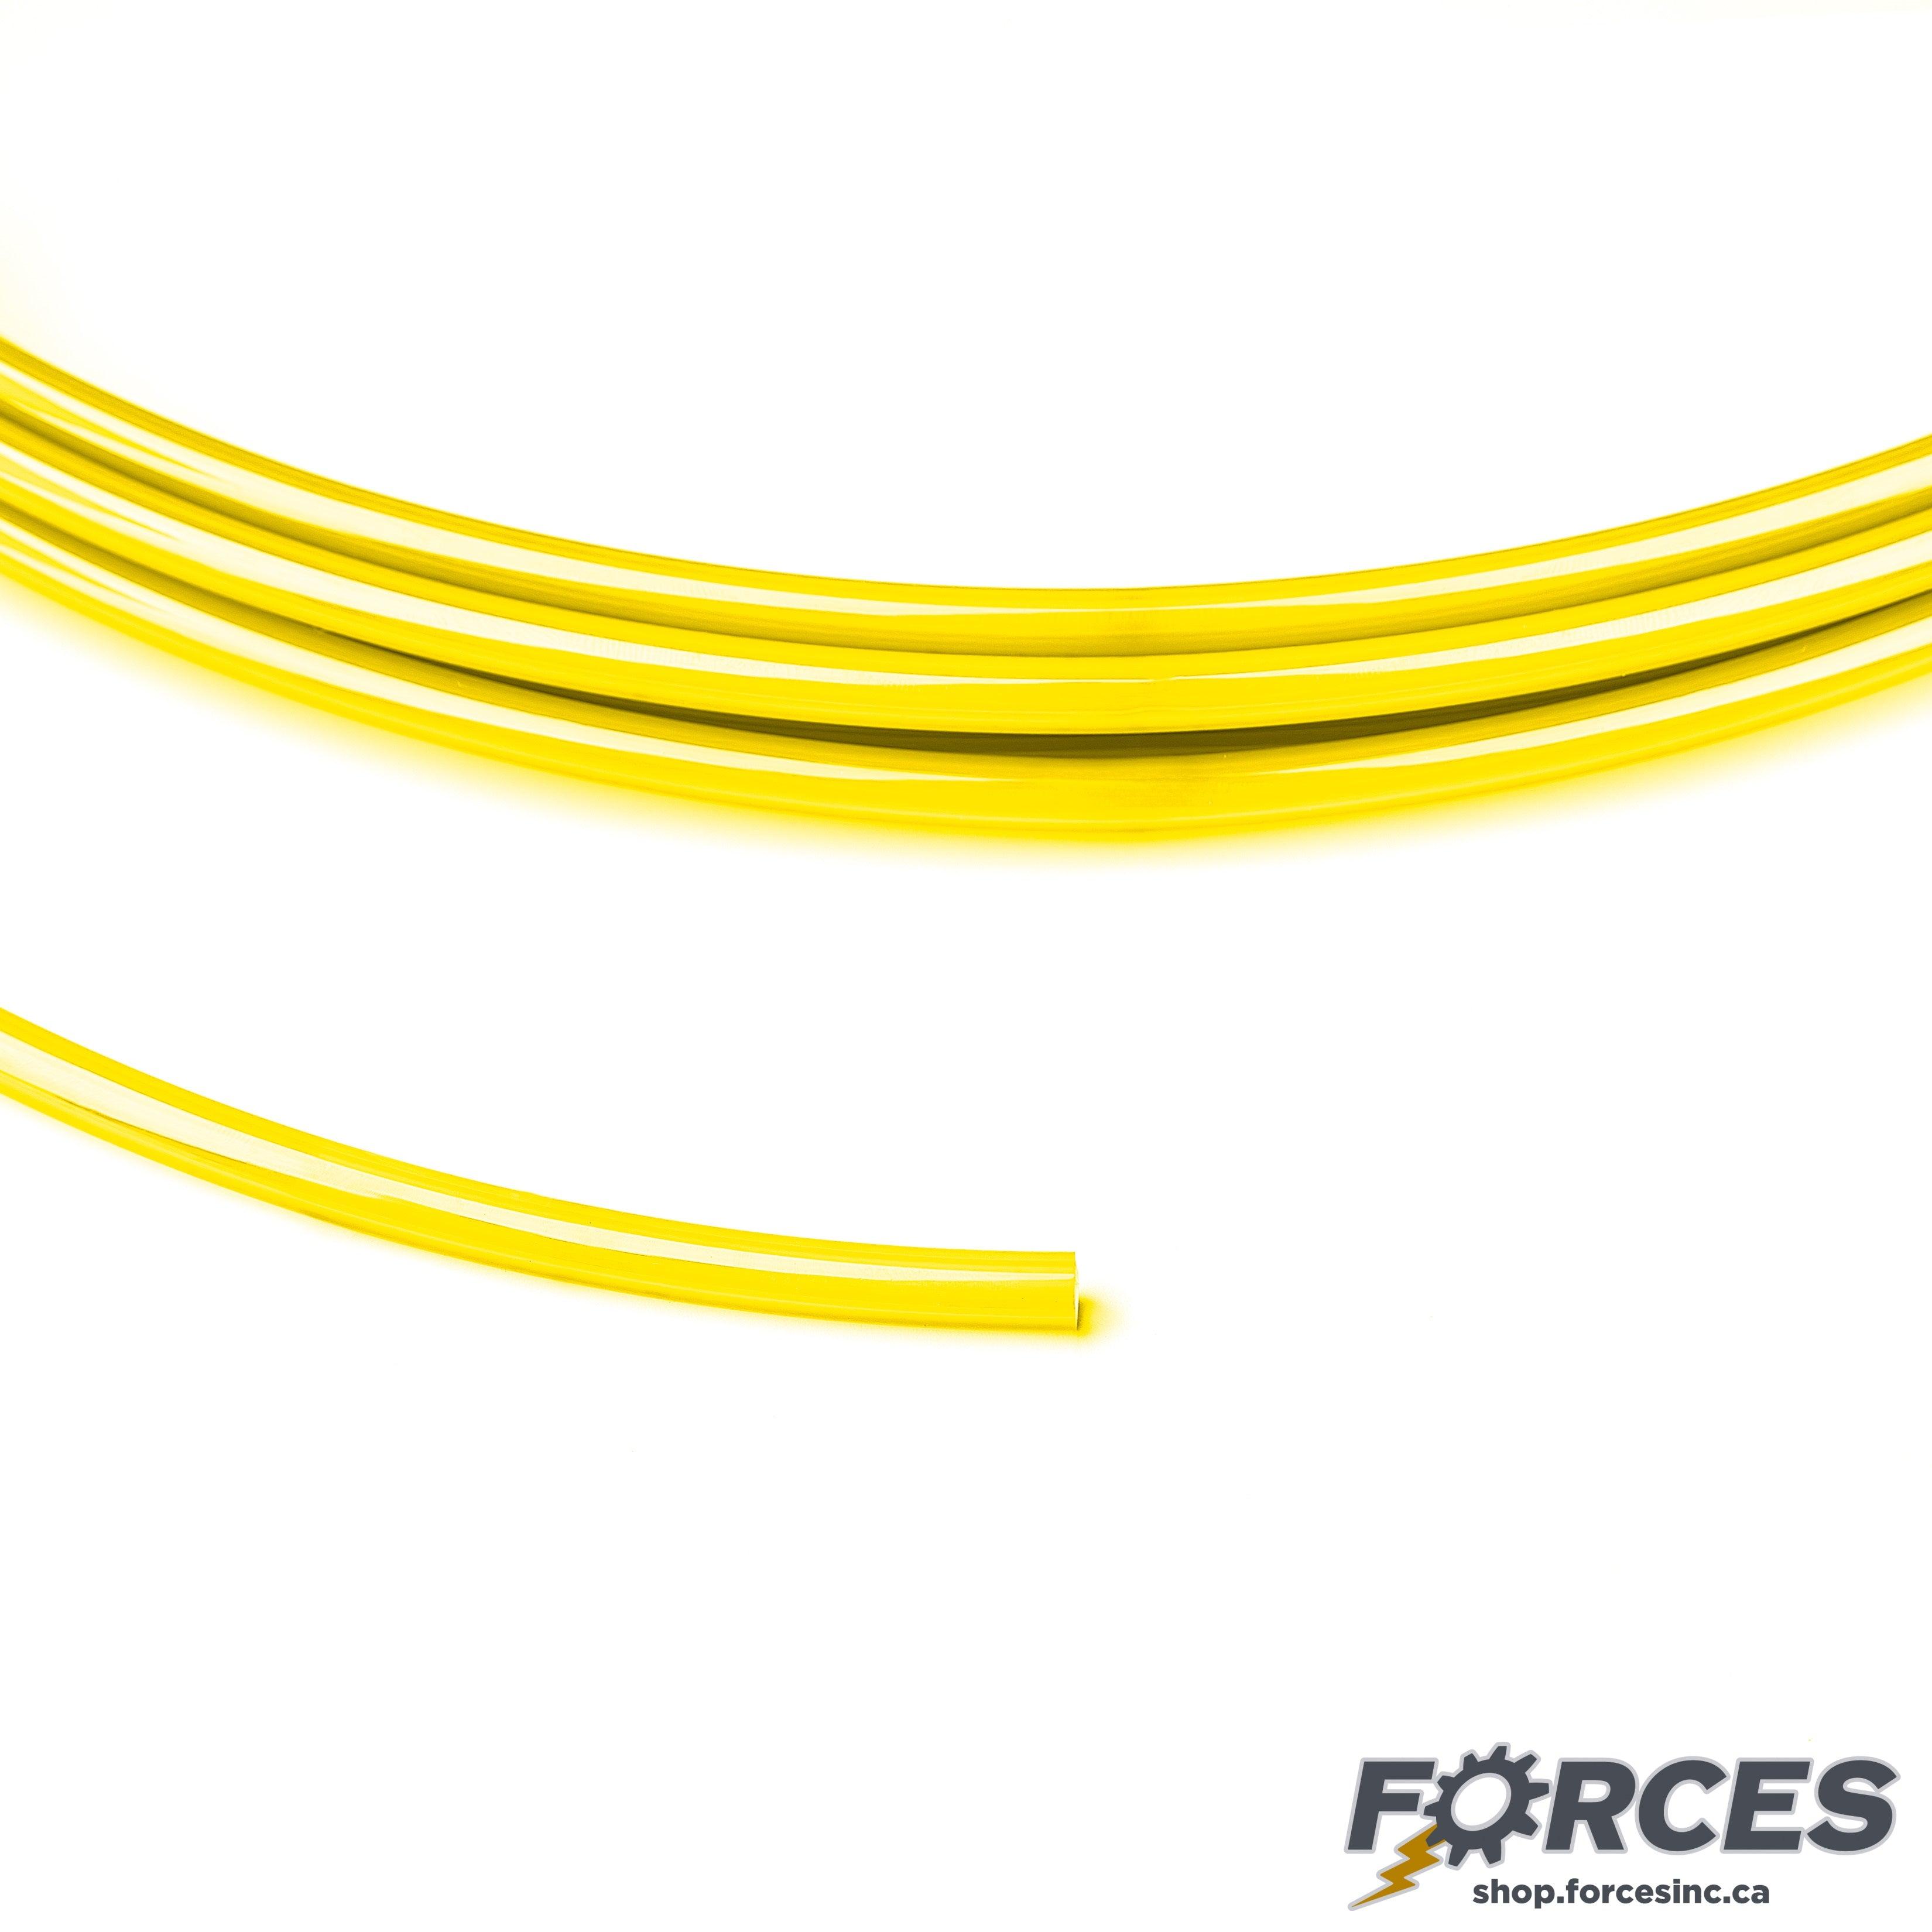 Pneumatic Air Tubing 16mm x 11mm Yellow Polyurethane - 165ft - Forces Inc